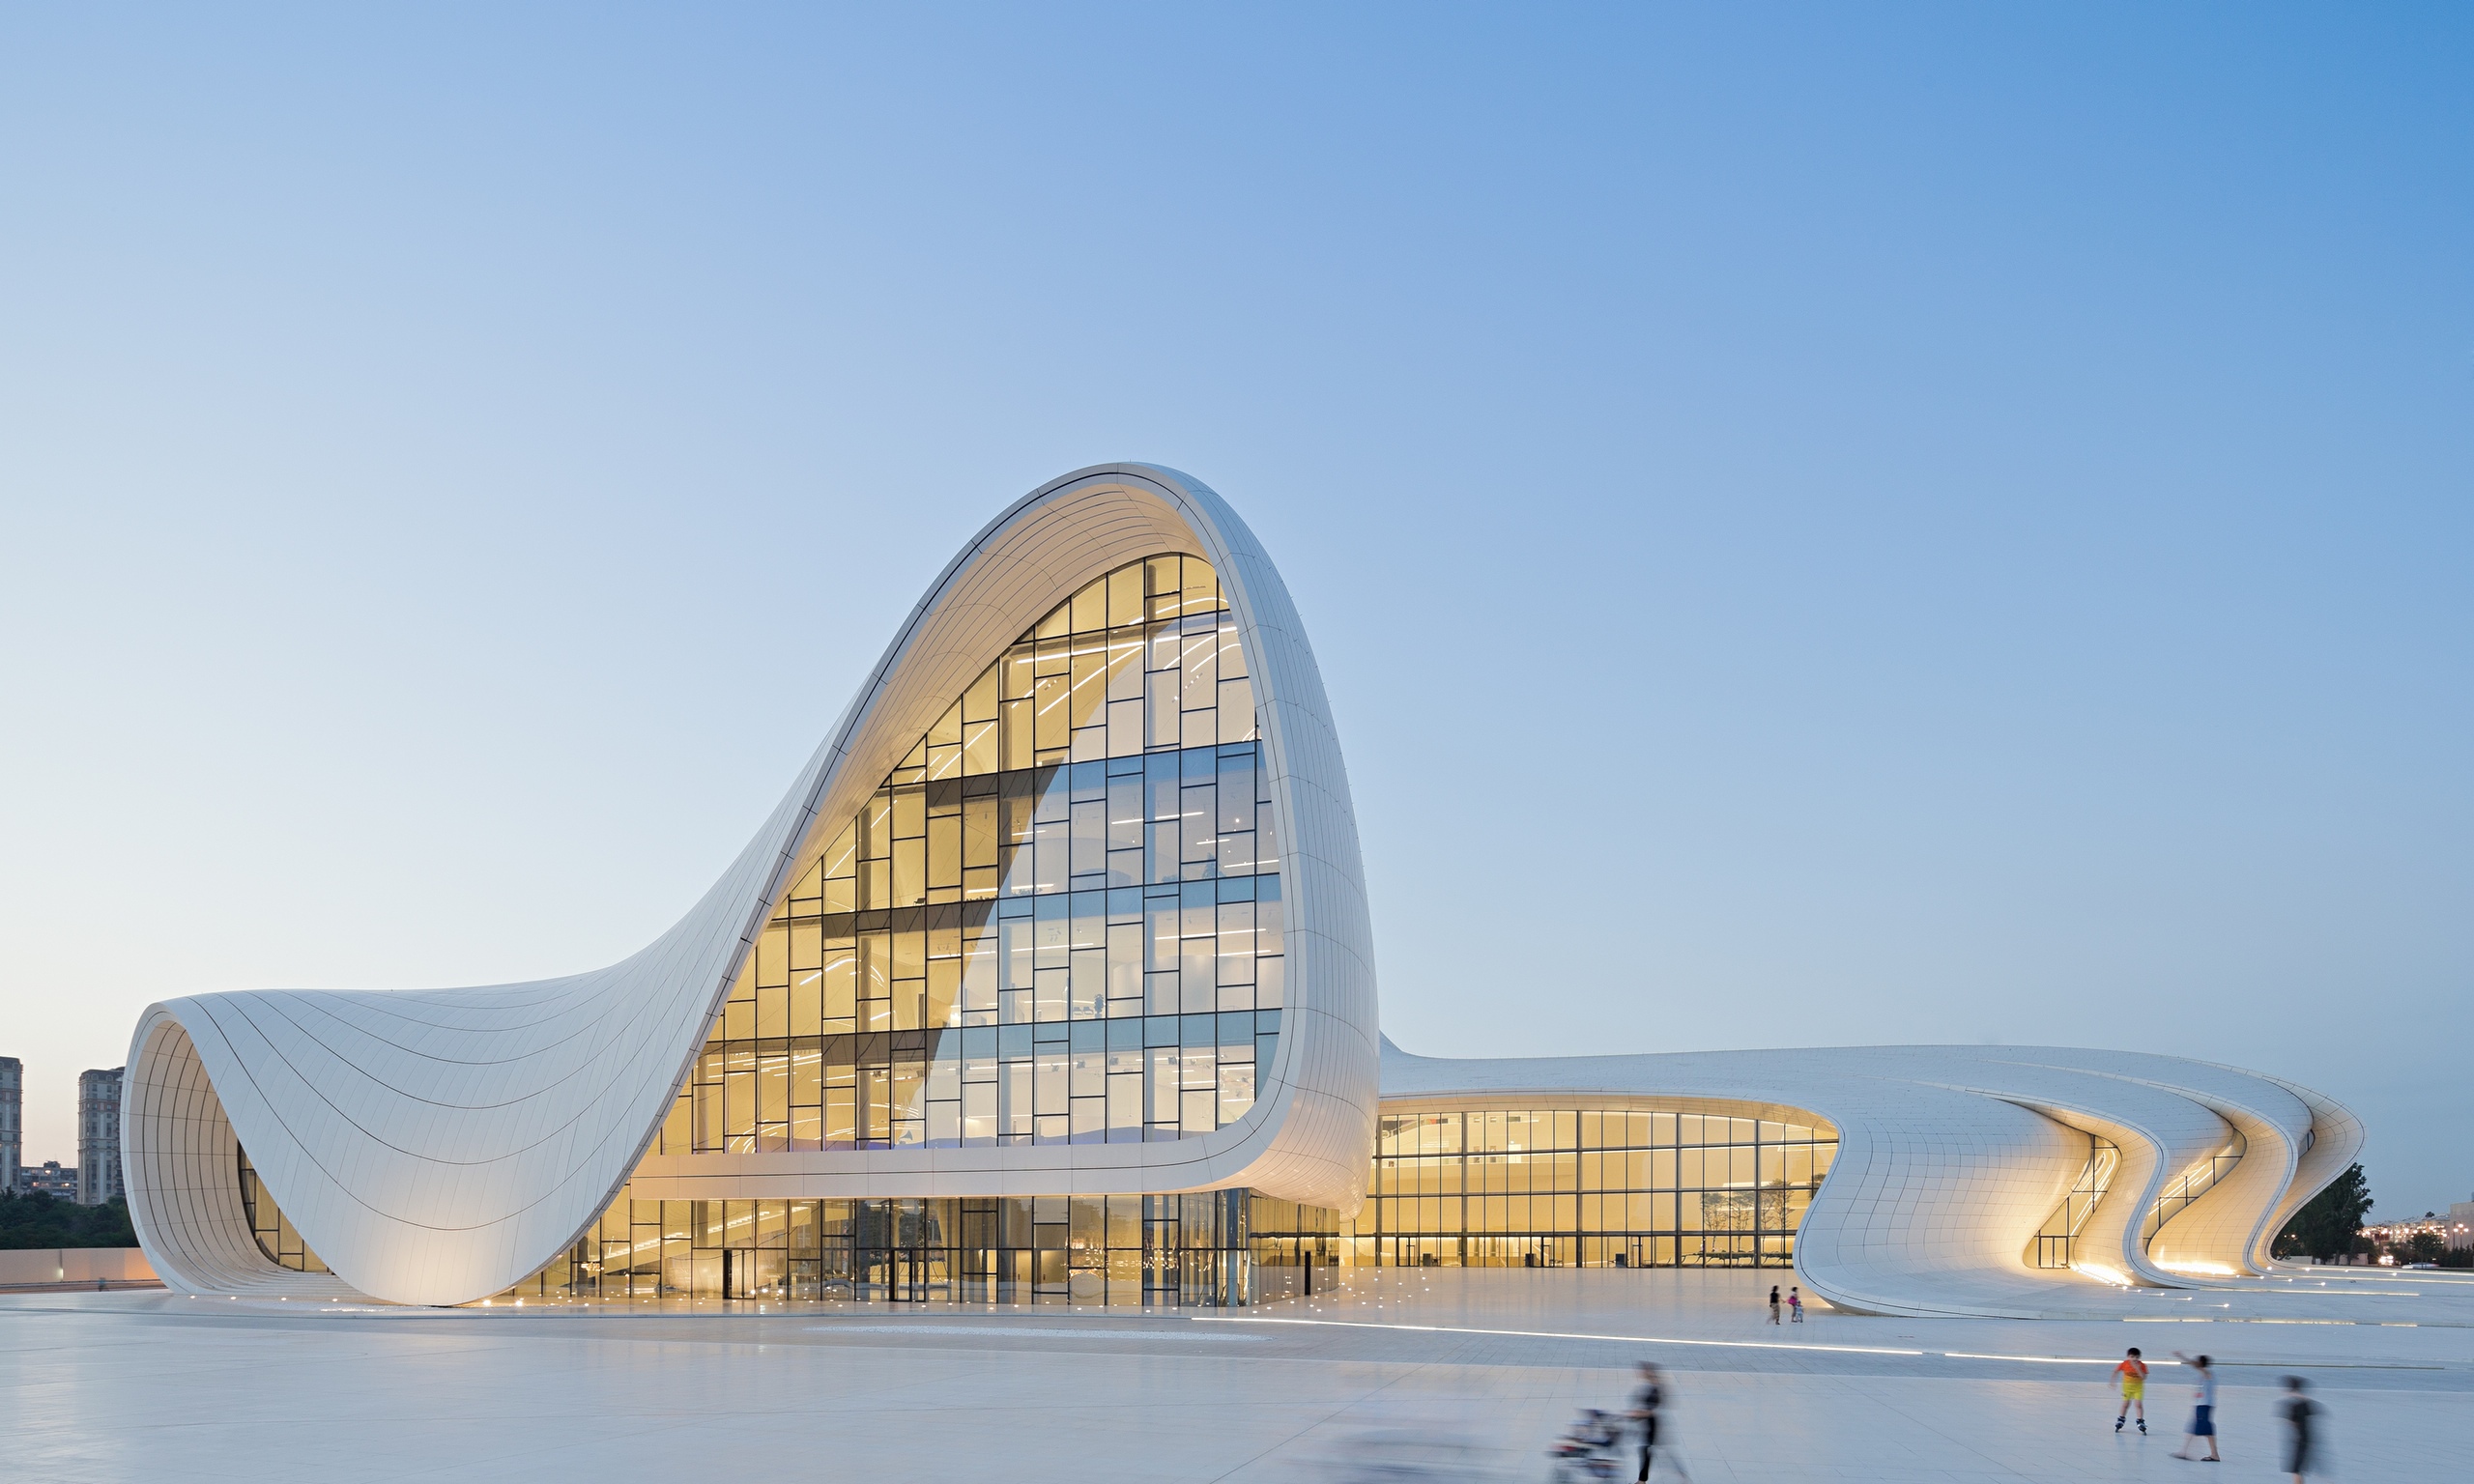 It is Zaha Hadid's duty to look at human rights issues ...